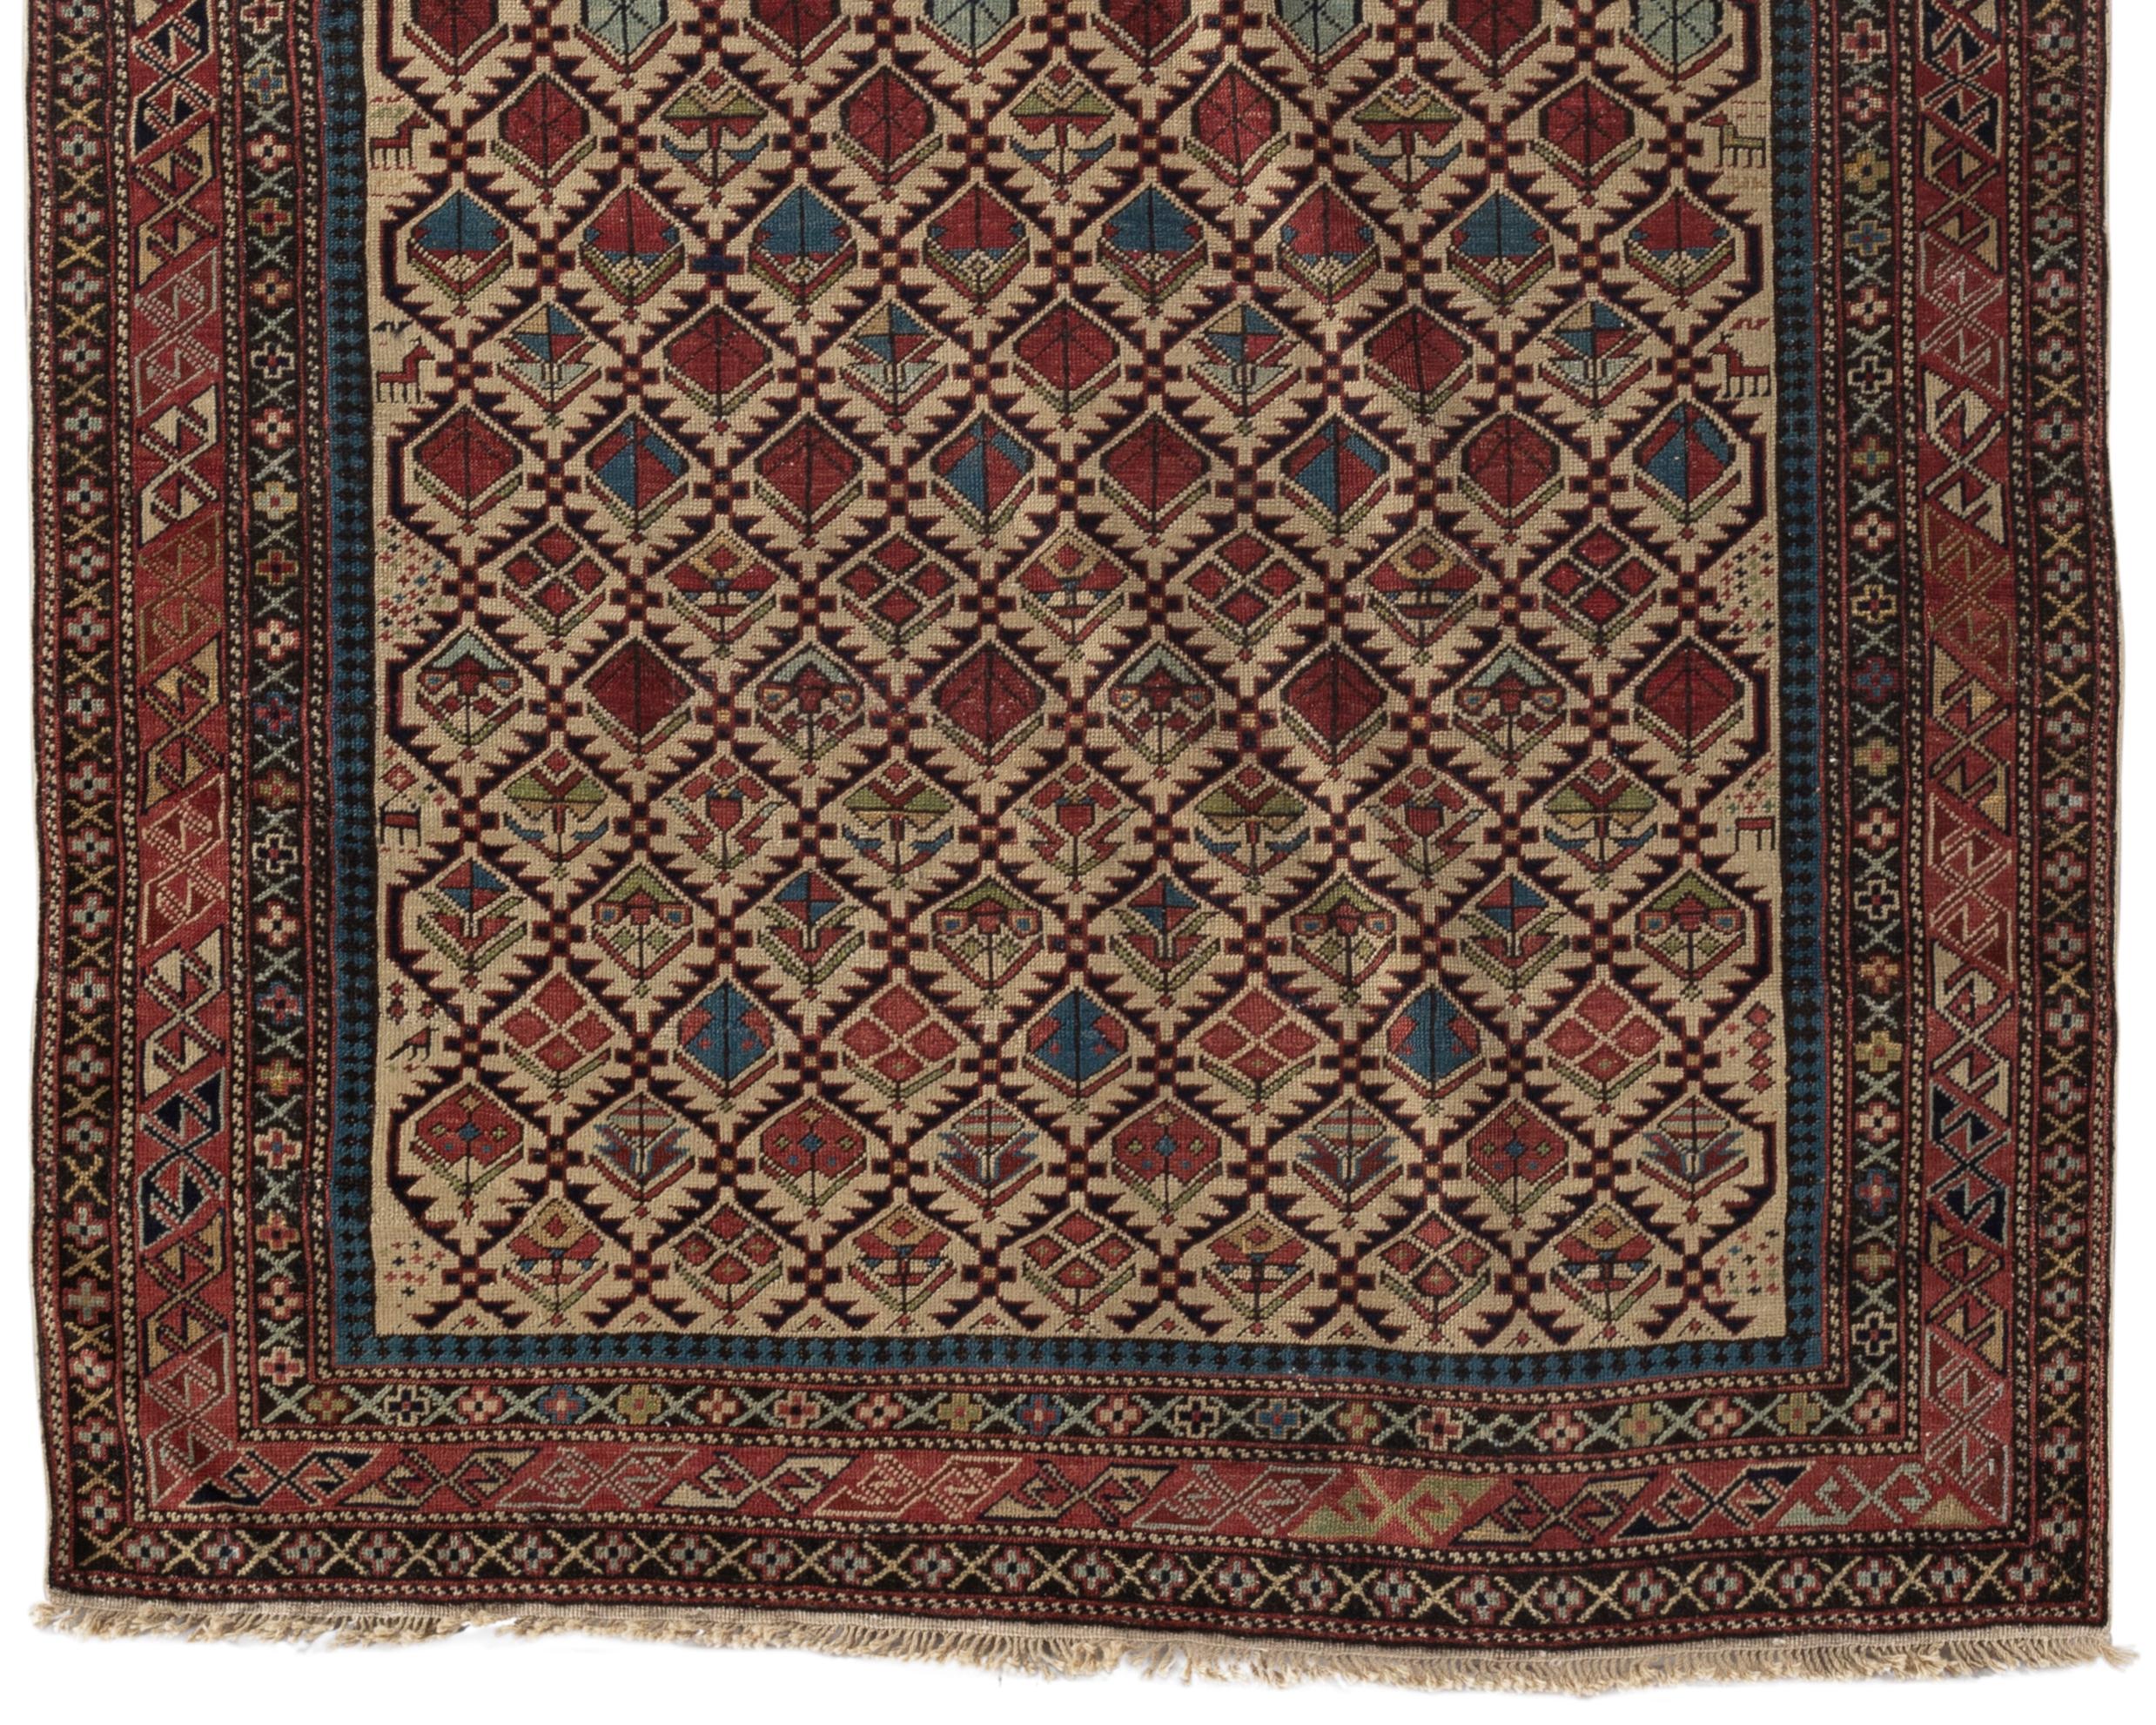 Antique circa 1880 Caucasian Dagestan Prayer rug. The delightful floral elements on the ivory ground together with the multiple borders in a variety of designs styles and colors create a rug which will bring brightness to any room. Dagestan is